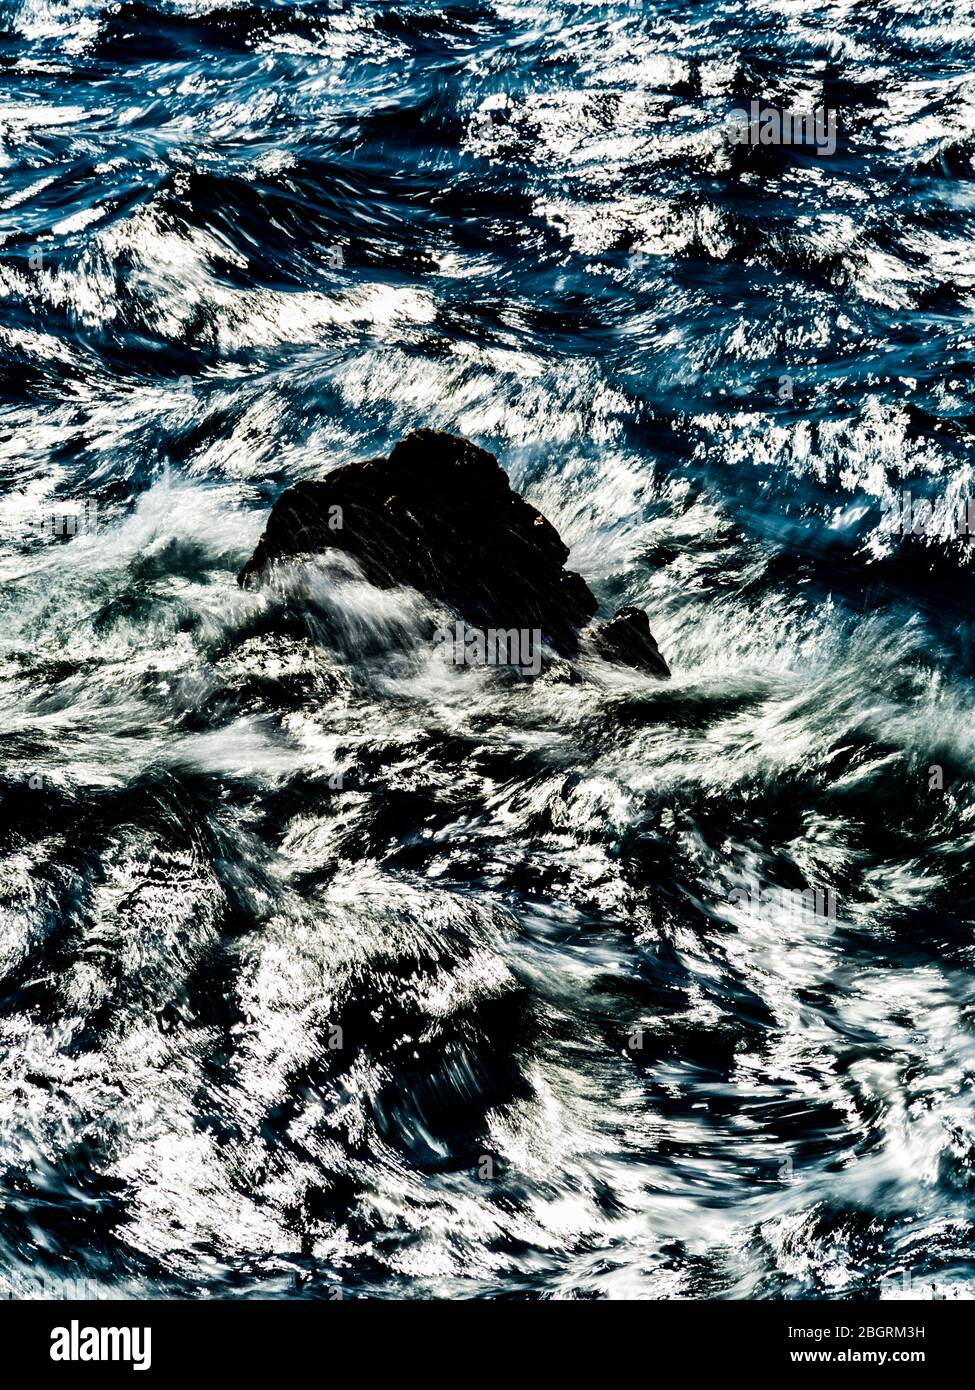 Waves crashing striking shore boulder solitary big rock intentionally slightly blurry conveying motion speed underwater dangerous for navigation Stock Photo